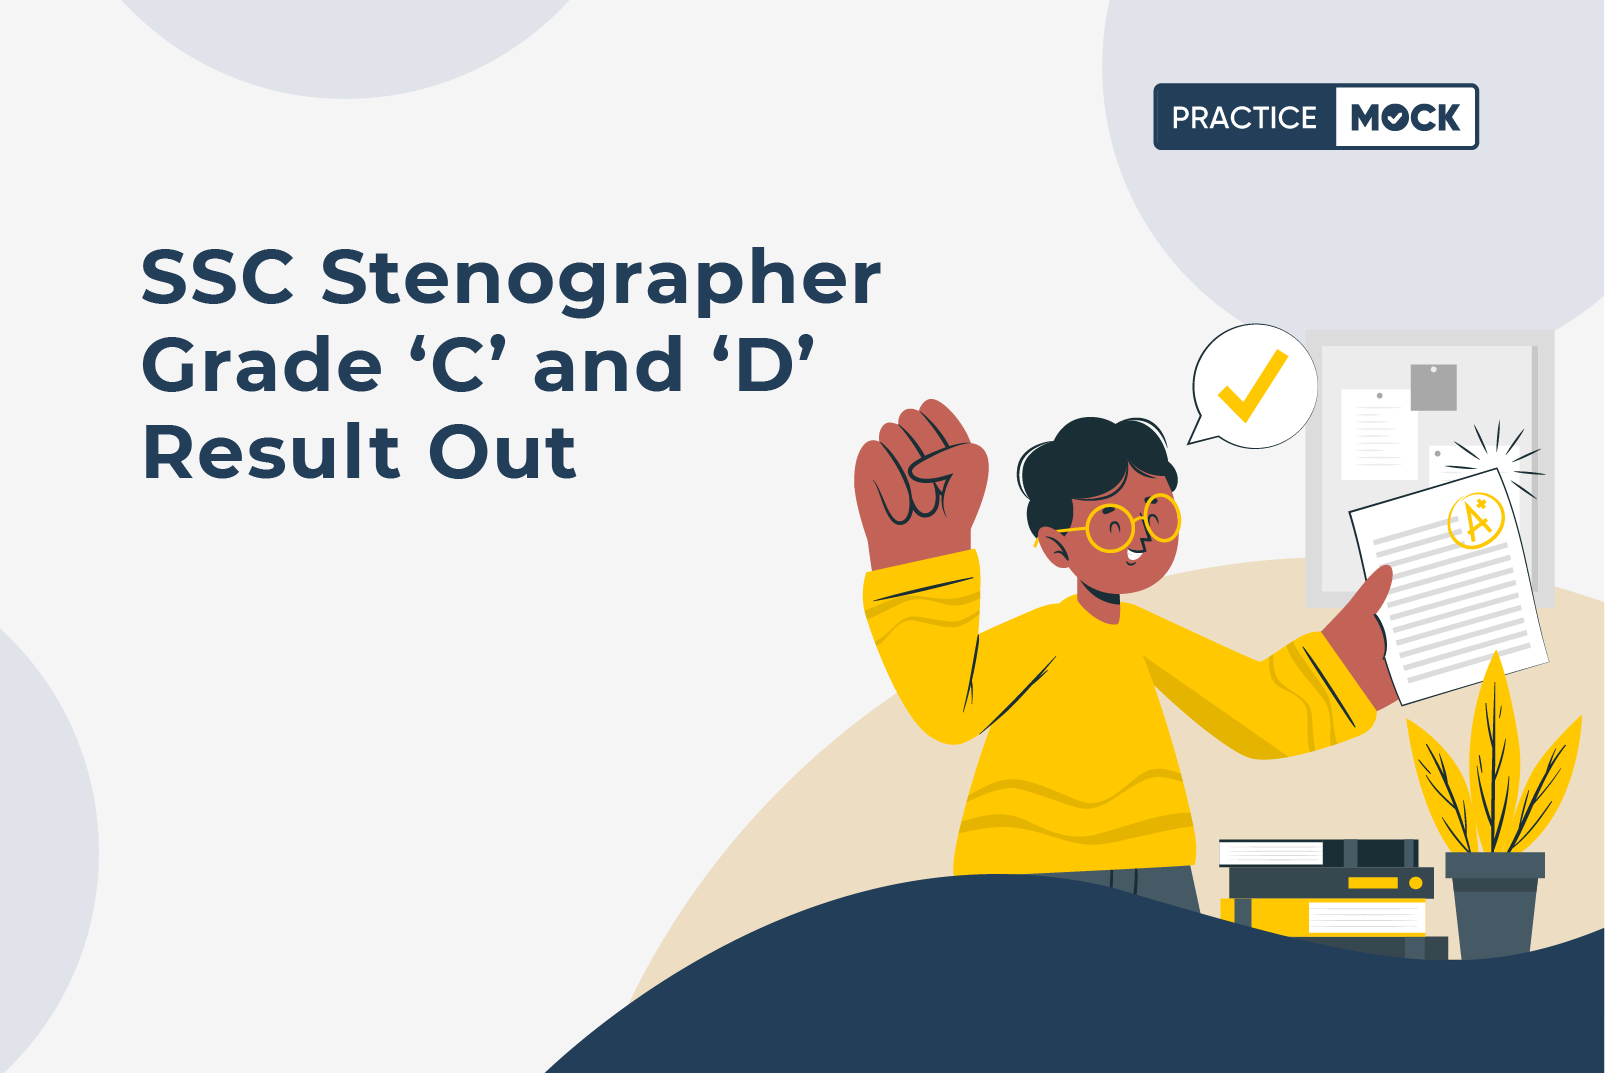 SSC Stenographer Grade 'C' and 'D' Result Out